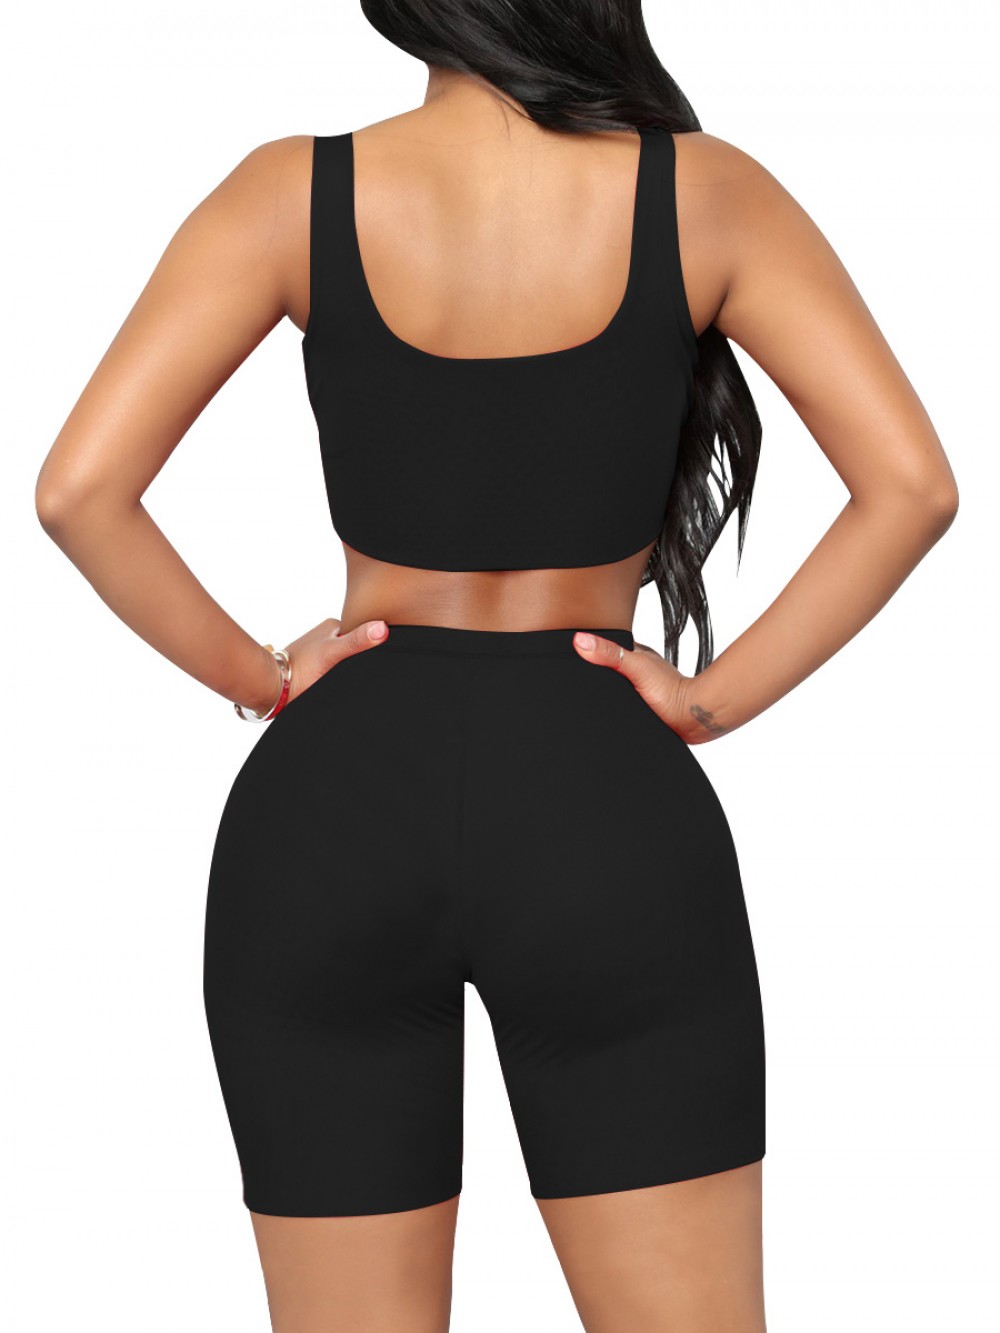 Upgrade Black Training Suits High Waist Scoop Neck Slimming Fit